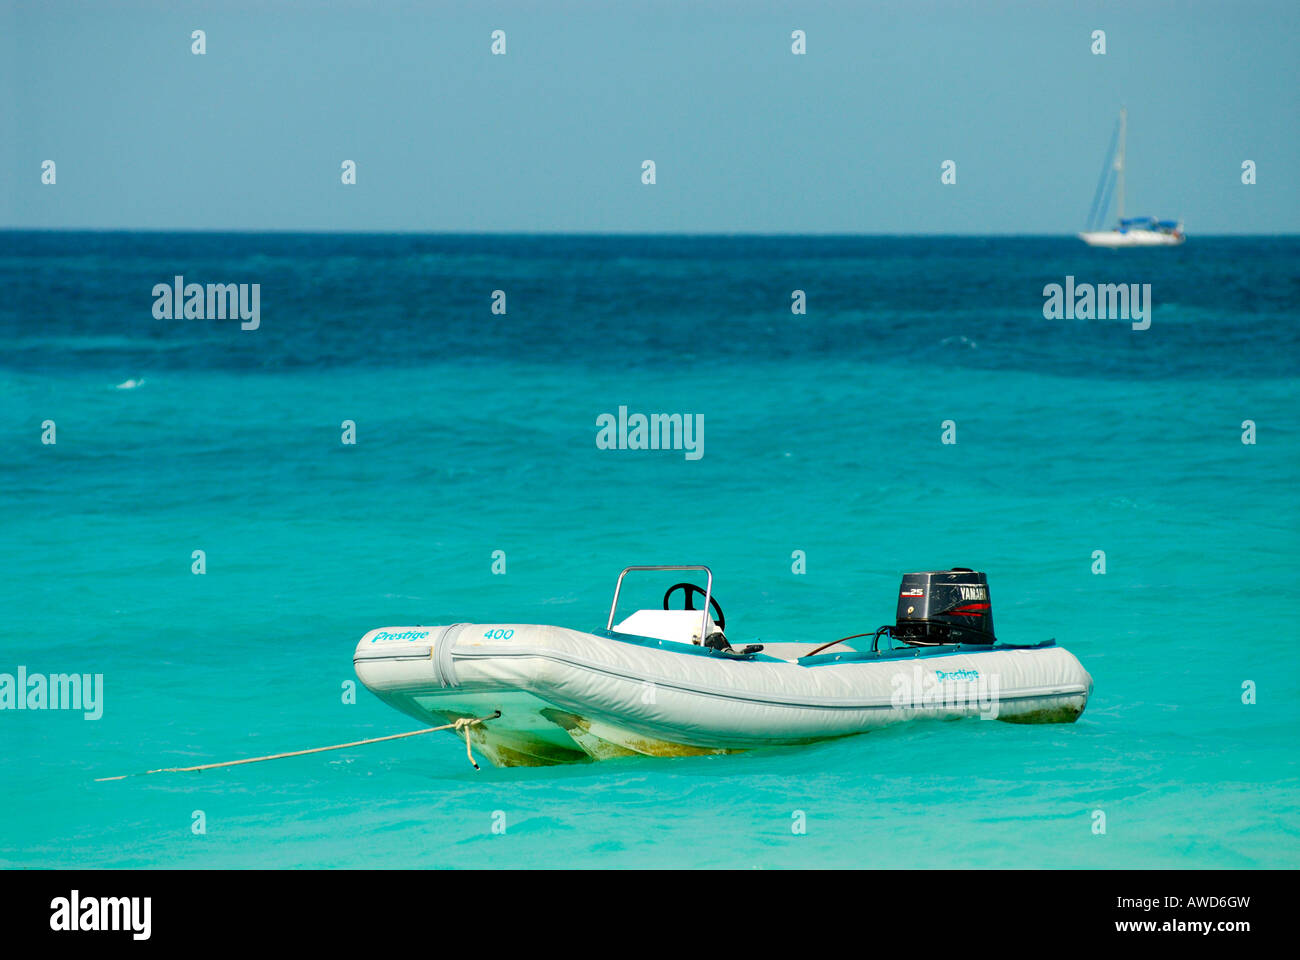 Turquoise waters, ubber dinghy in the sea with sailboat in the background, Cayo Largo, Cuba, Americas Stock Photo